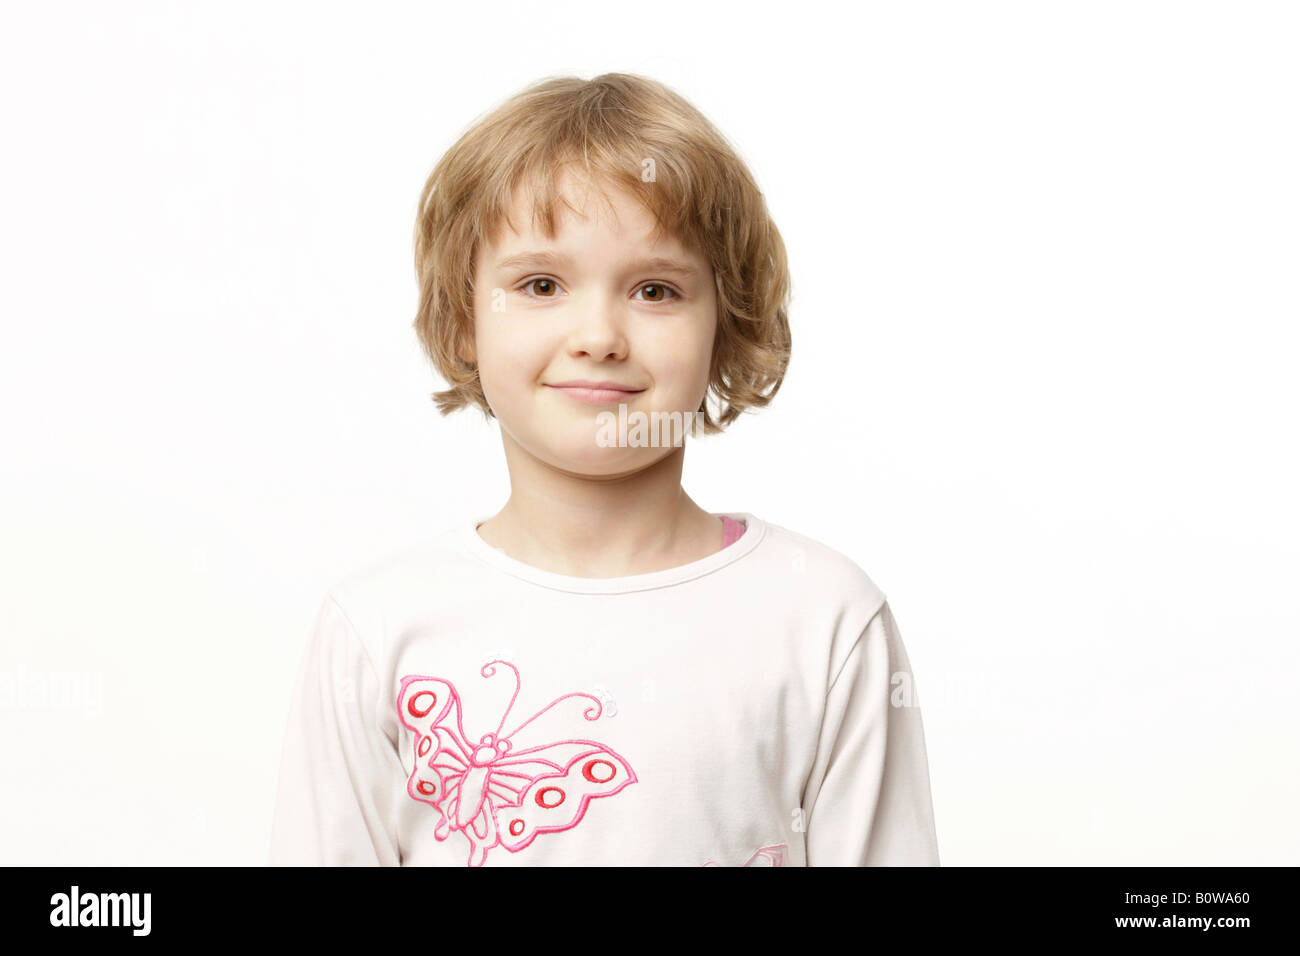 Portrait, 8-year-old girl Stock Photo